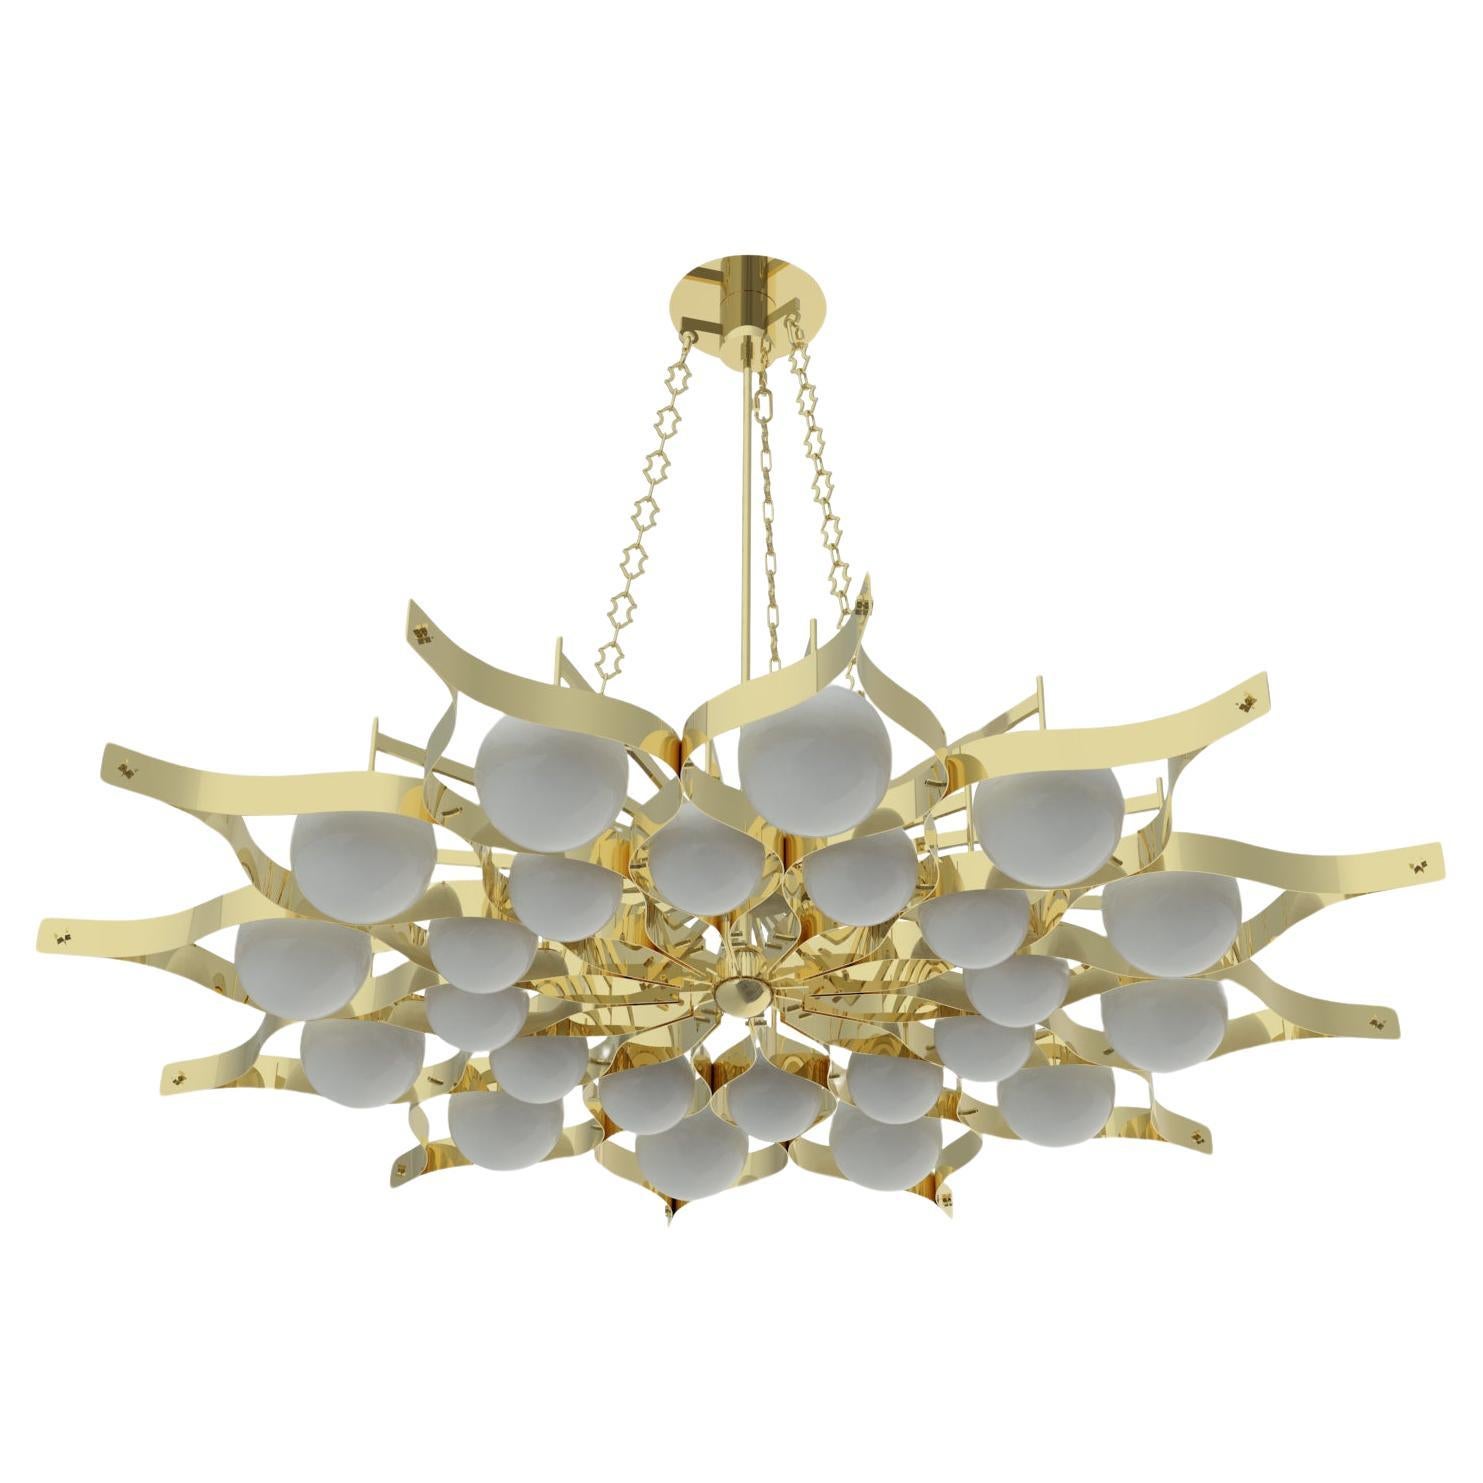 21st Century Pavone Large Pendant Lamp with chains, UL, phase cut, Gio Ponti For Sale